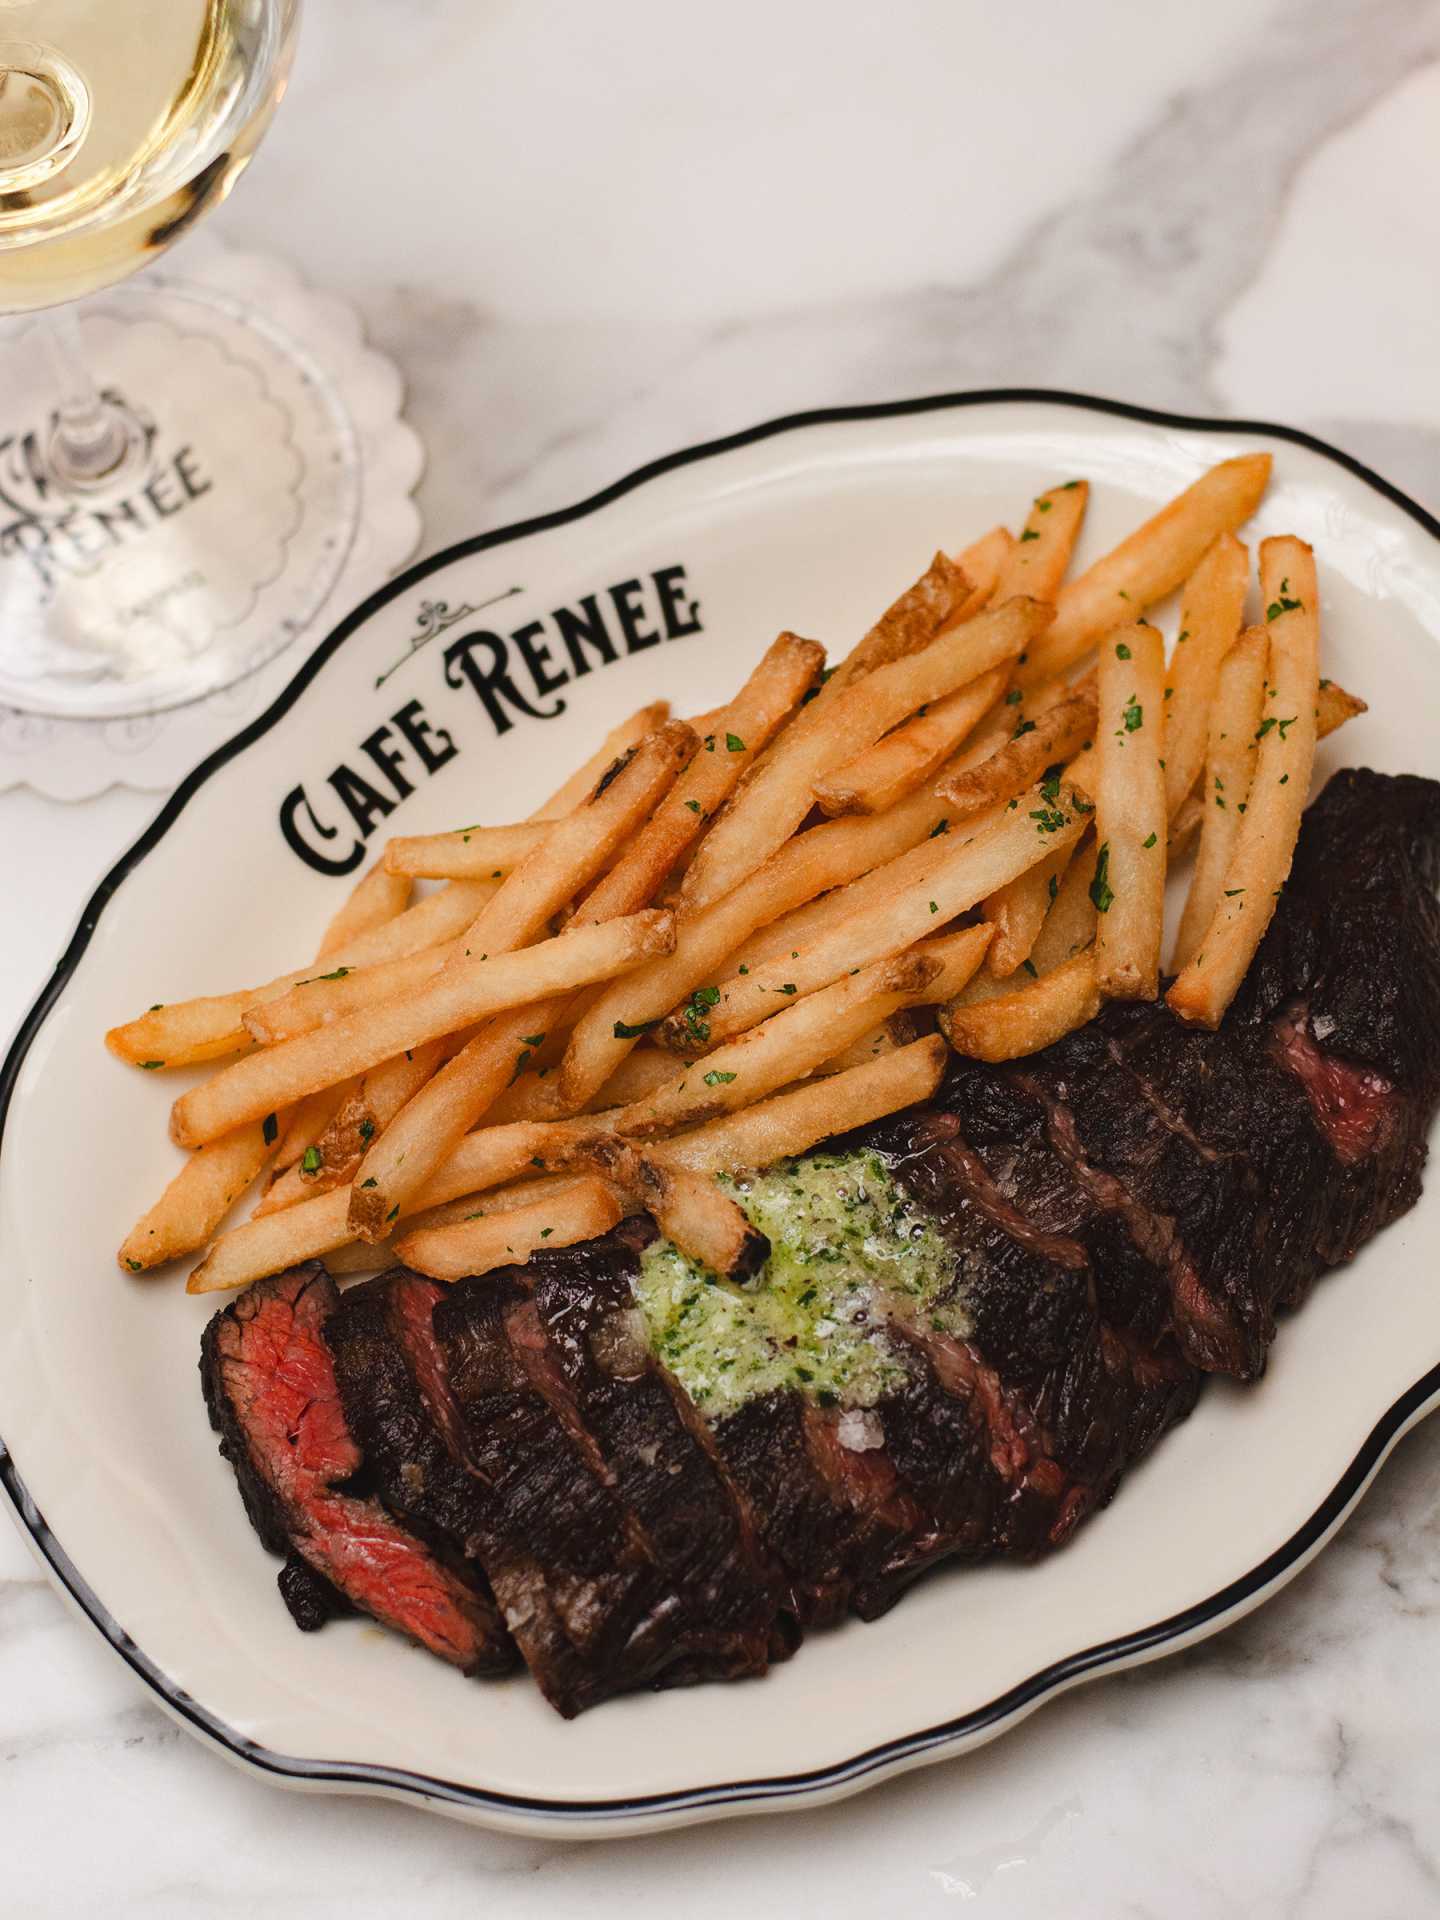 Best new Toronto restaurants | Steak and frites at Cafe Renee in Toronto